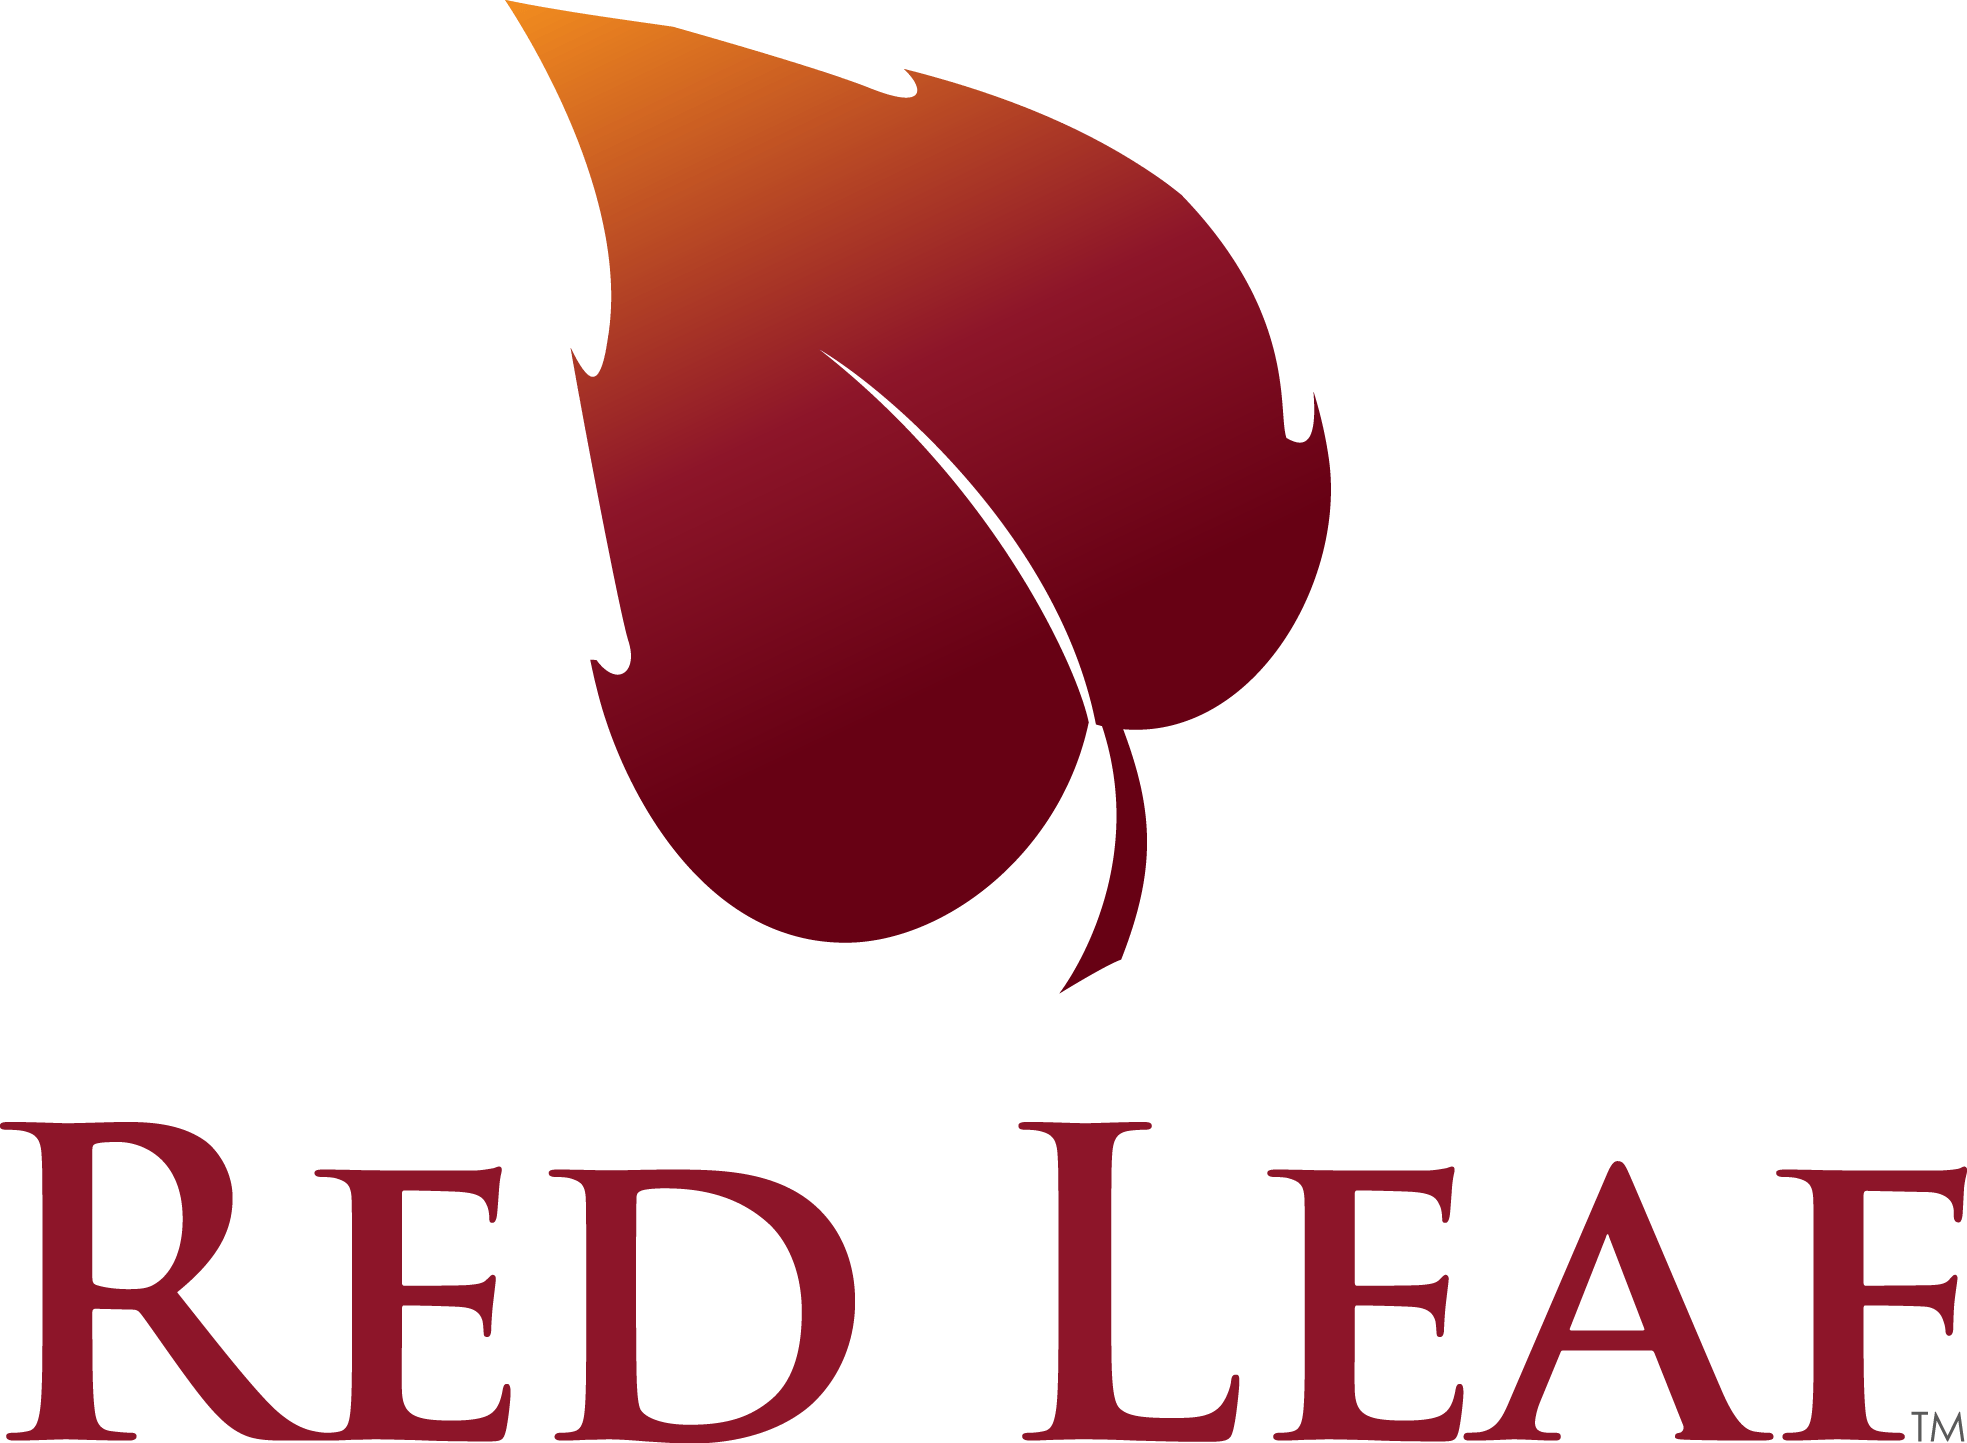 Red Leaf Logo - About Leaf Architectural Stonemasonry